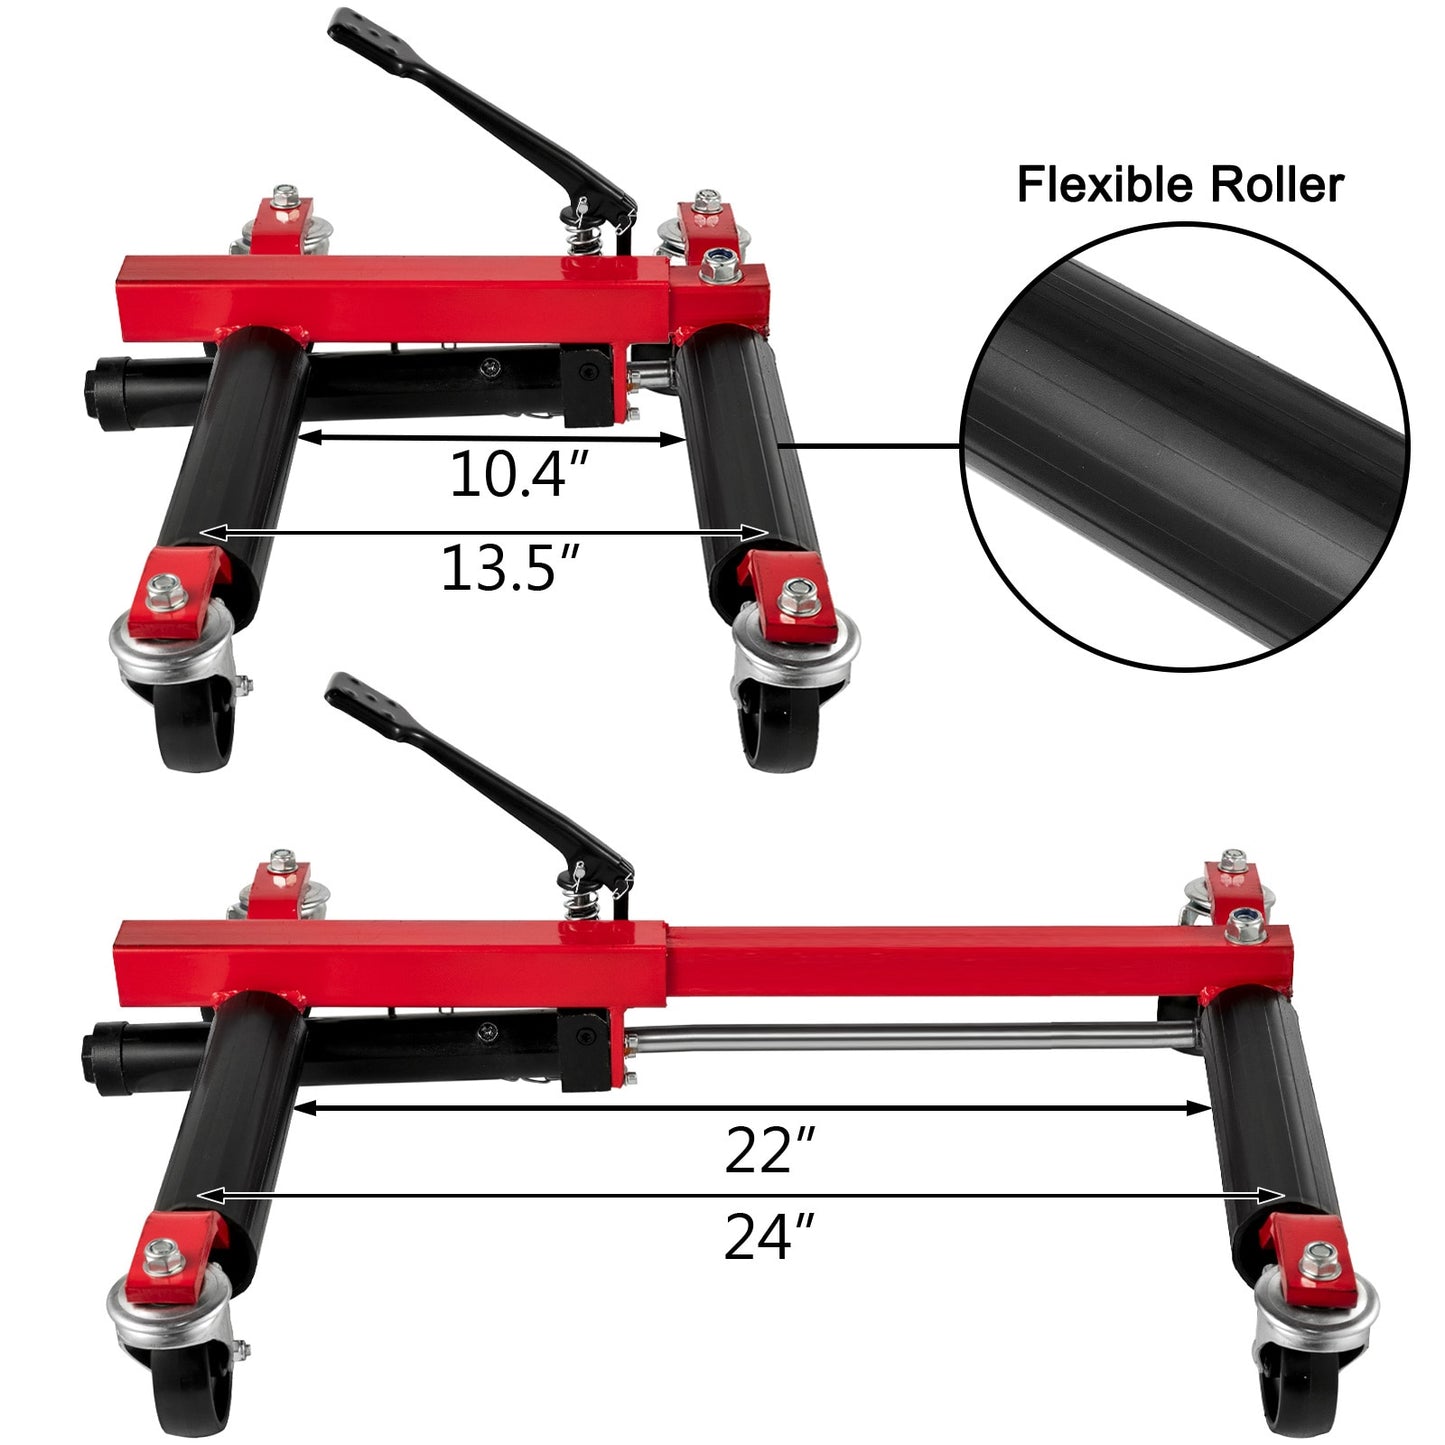 Wheel Dolly Hydraulic Car Dolly Tire Skate 1500LBS/680KG Jacks With Rotating Wheel for Vehicle SUV Car Auto Repair Moving